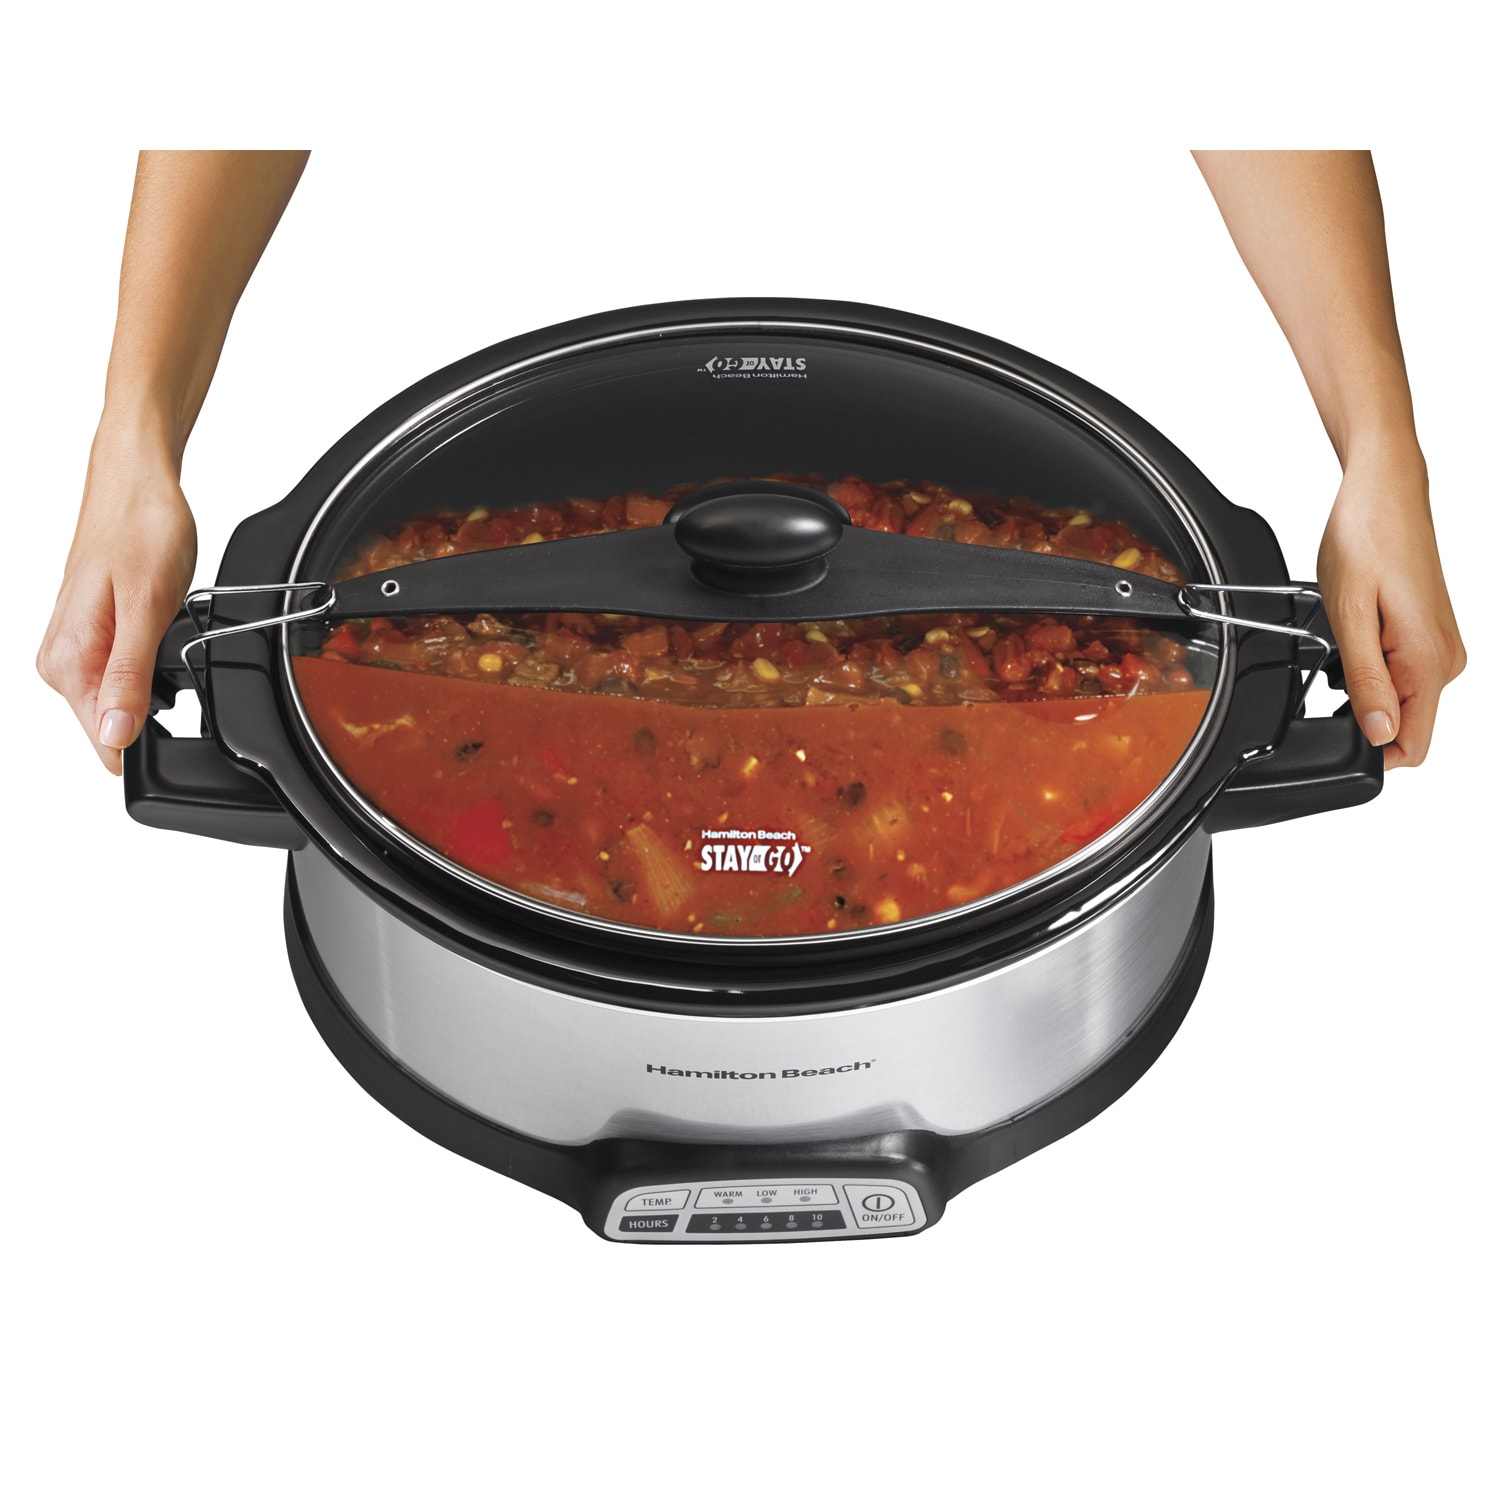 https://ak1.ostkcdn.com/images/products/8250981/Hamilton-Beach-Programmable-6-quart-Slow-Cooker-with-Lid-Clips-and-Gasket-7044ddd3-1481-48d5-9bbd-6805583fa5a8.jpg